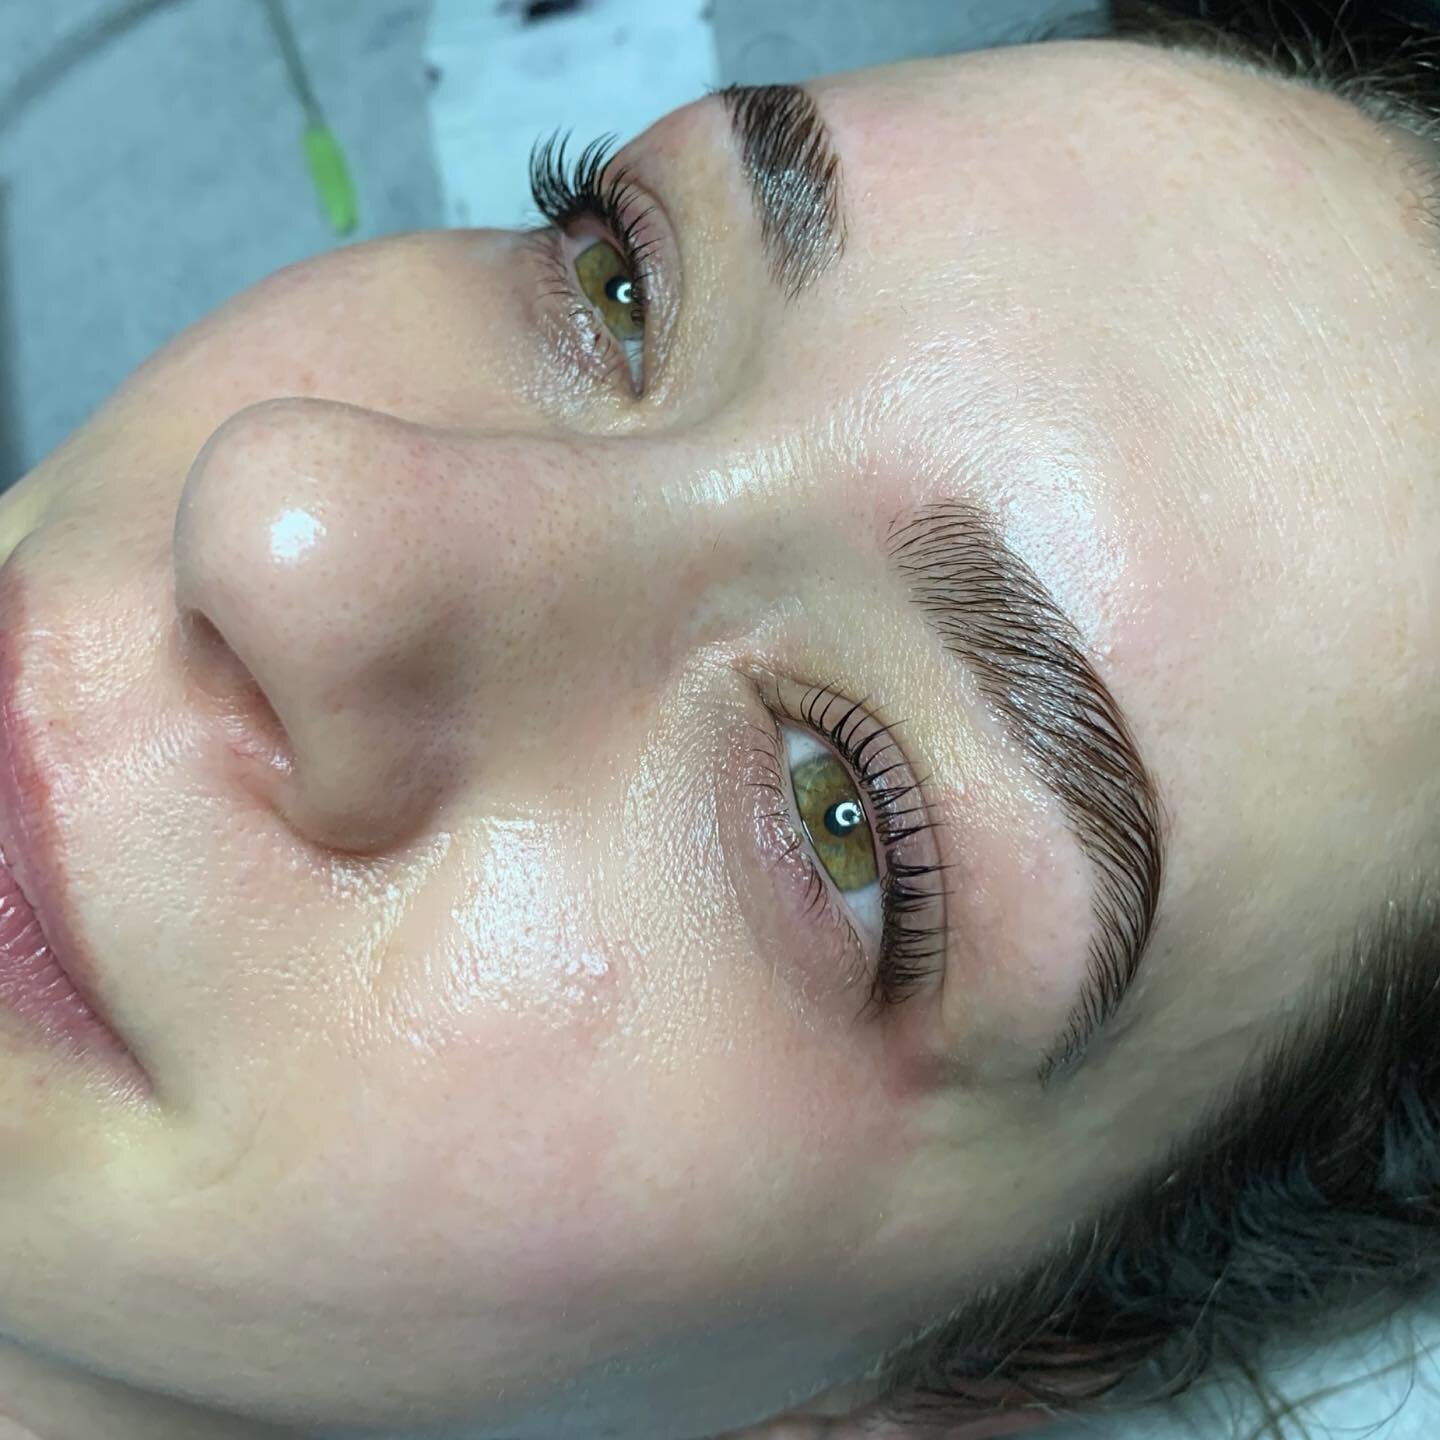 My girlie got the works today! 
Lash Lift ✅ 
Brow Lamination ✅ 
Dermaplaning ✅ 

#booknow #dermaplaning #lashlift #browlamination #tinting #threading #browgoals #lashgoals #TheFaceLabPgh